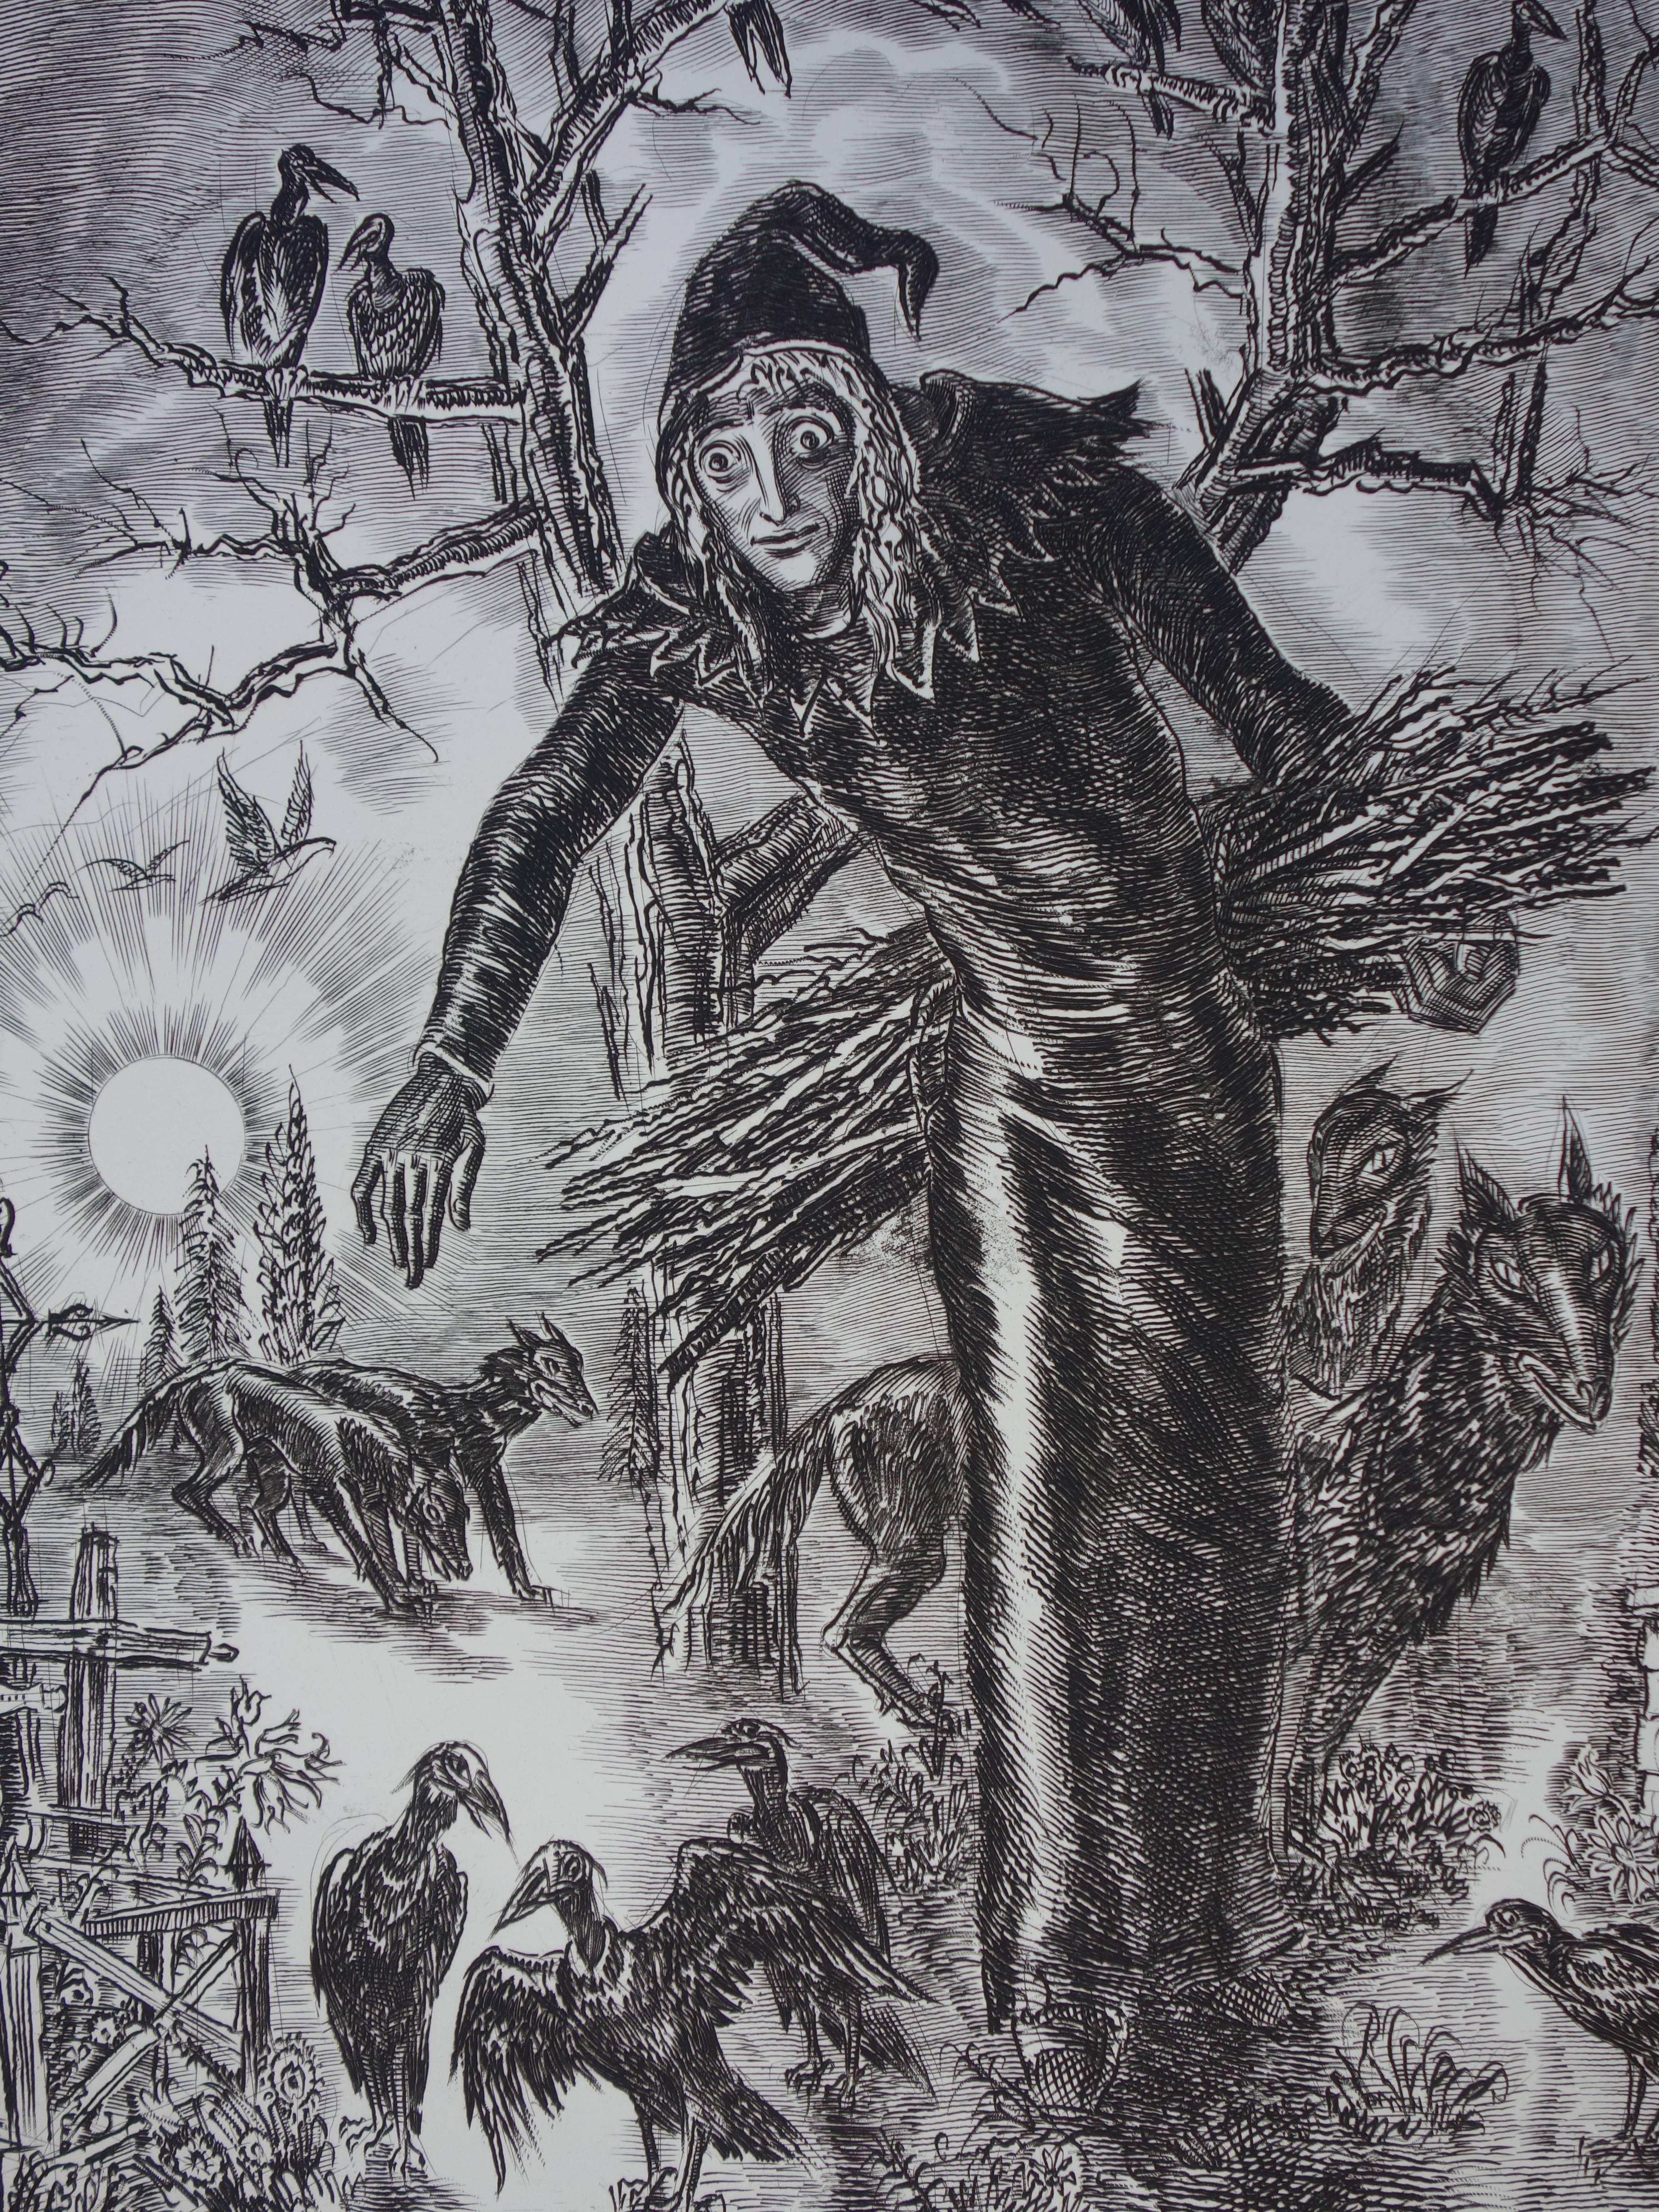 November : Halloween Time - Original handsigned etching - Exceptional n° 1/100 - Gray Figurative Print by Albert Decaris